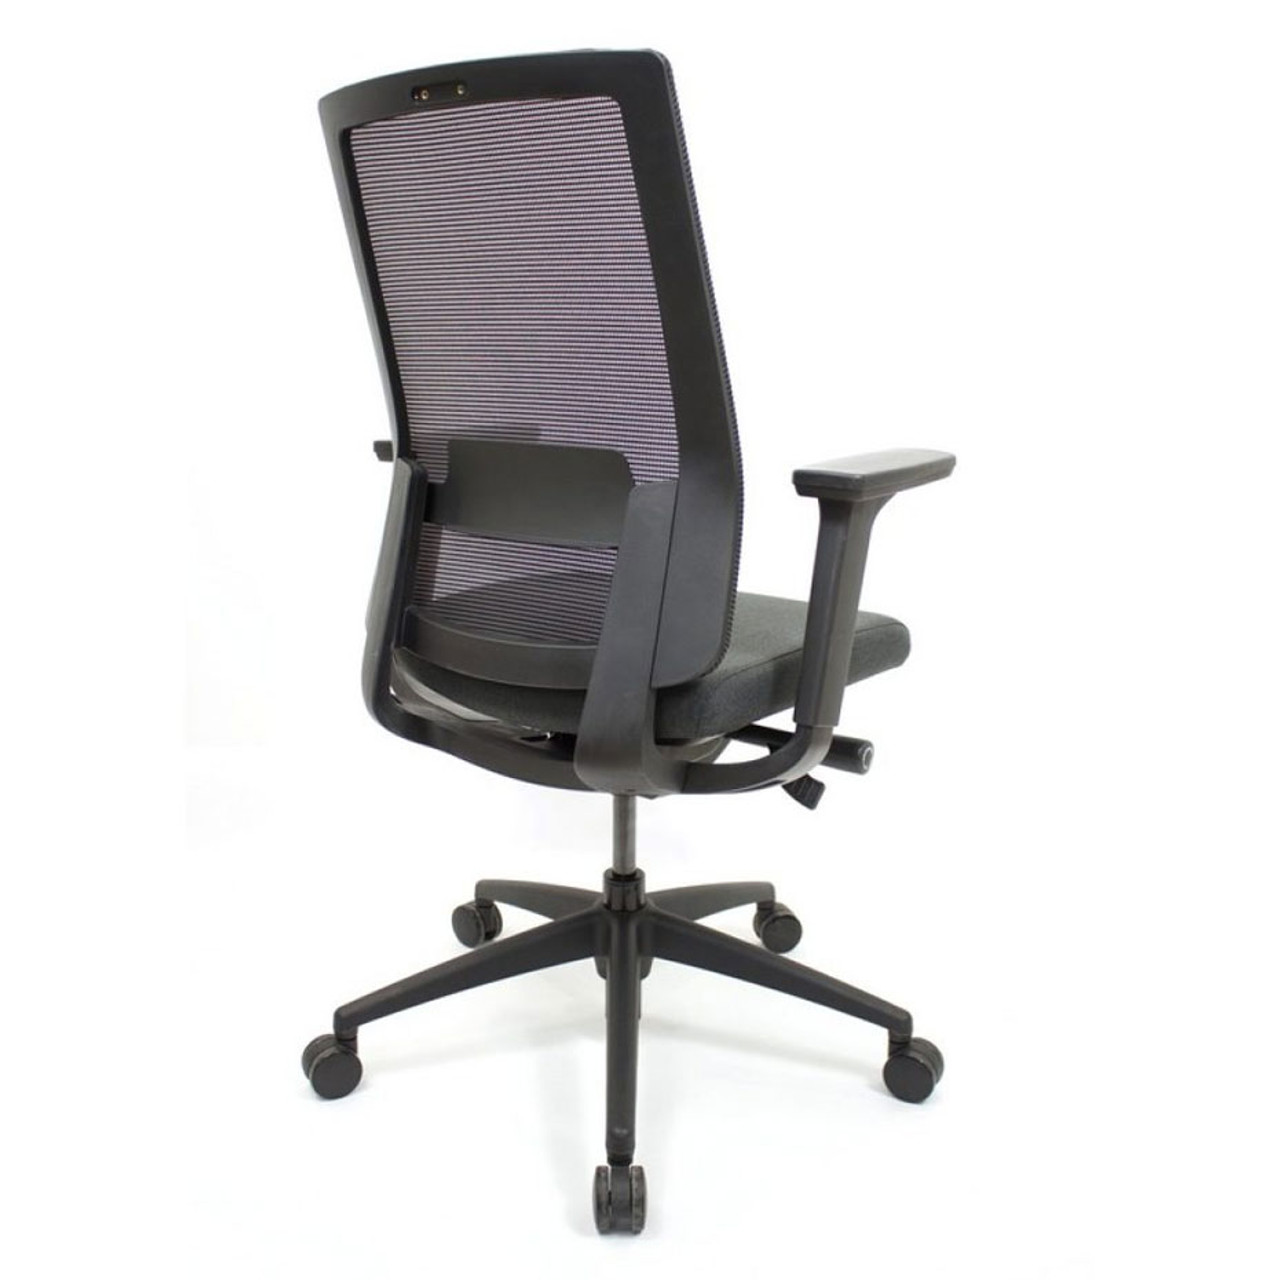 ICON Q2 Mesh Back Office Chair with Headrest - Jet Black